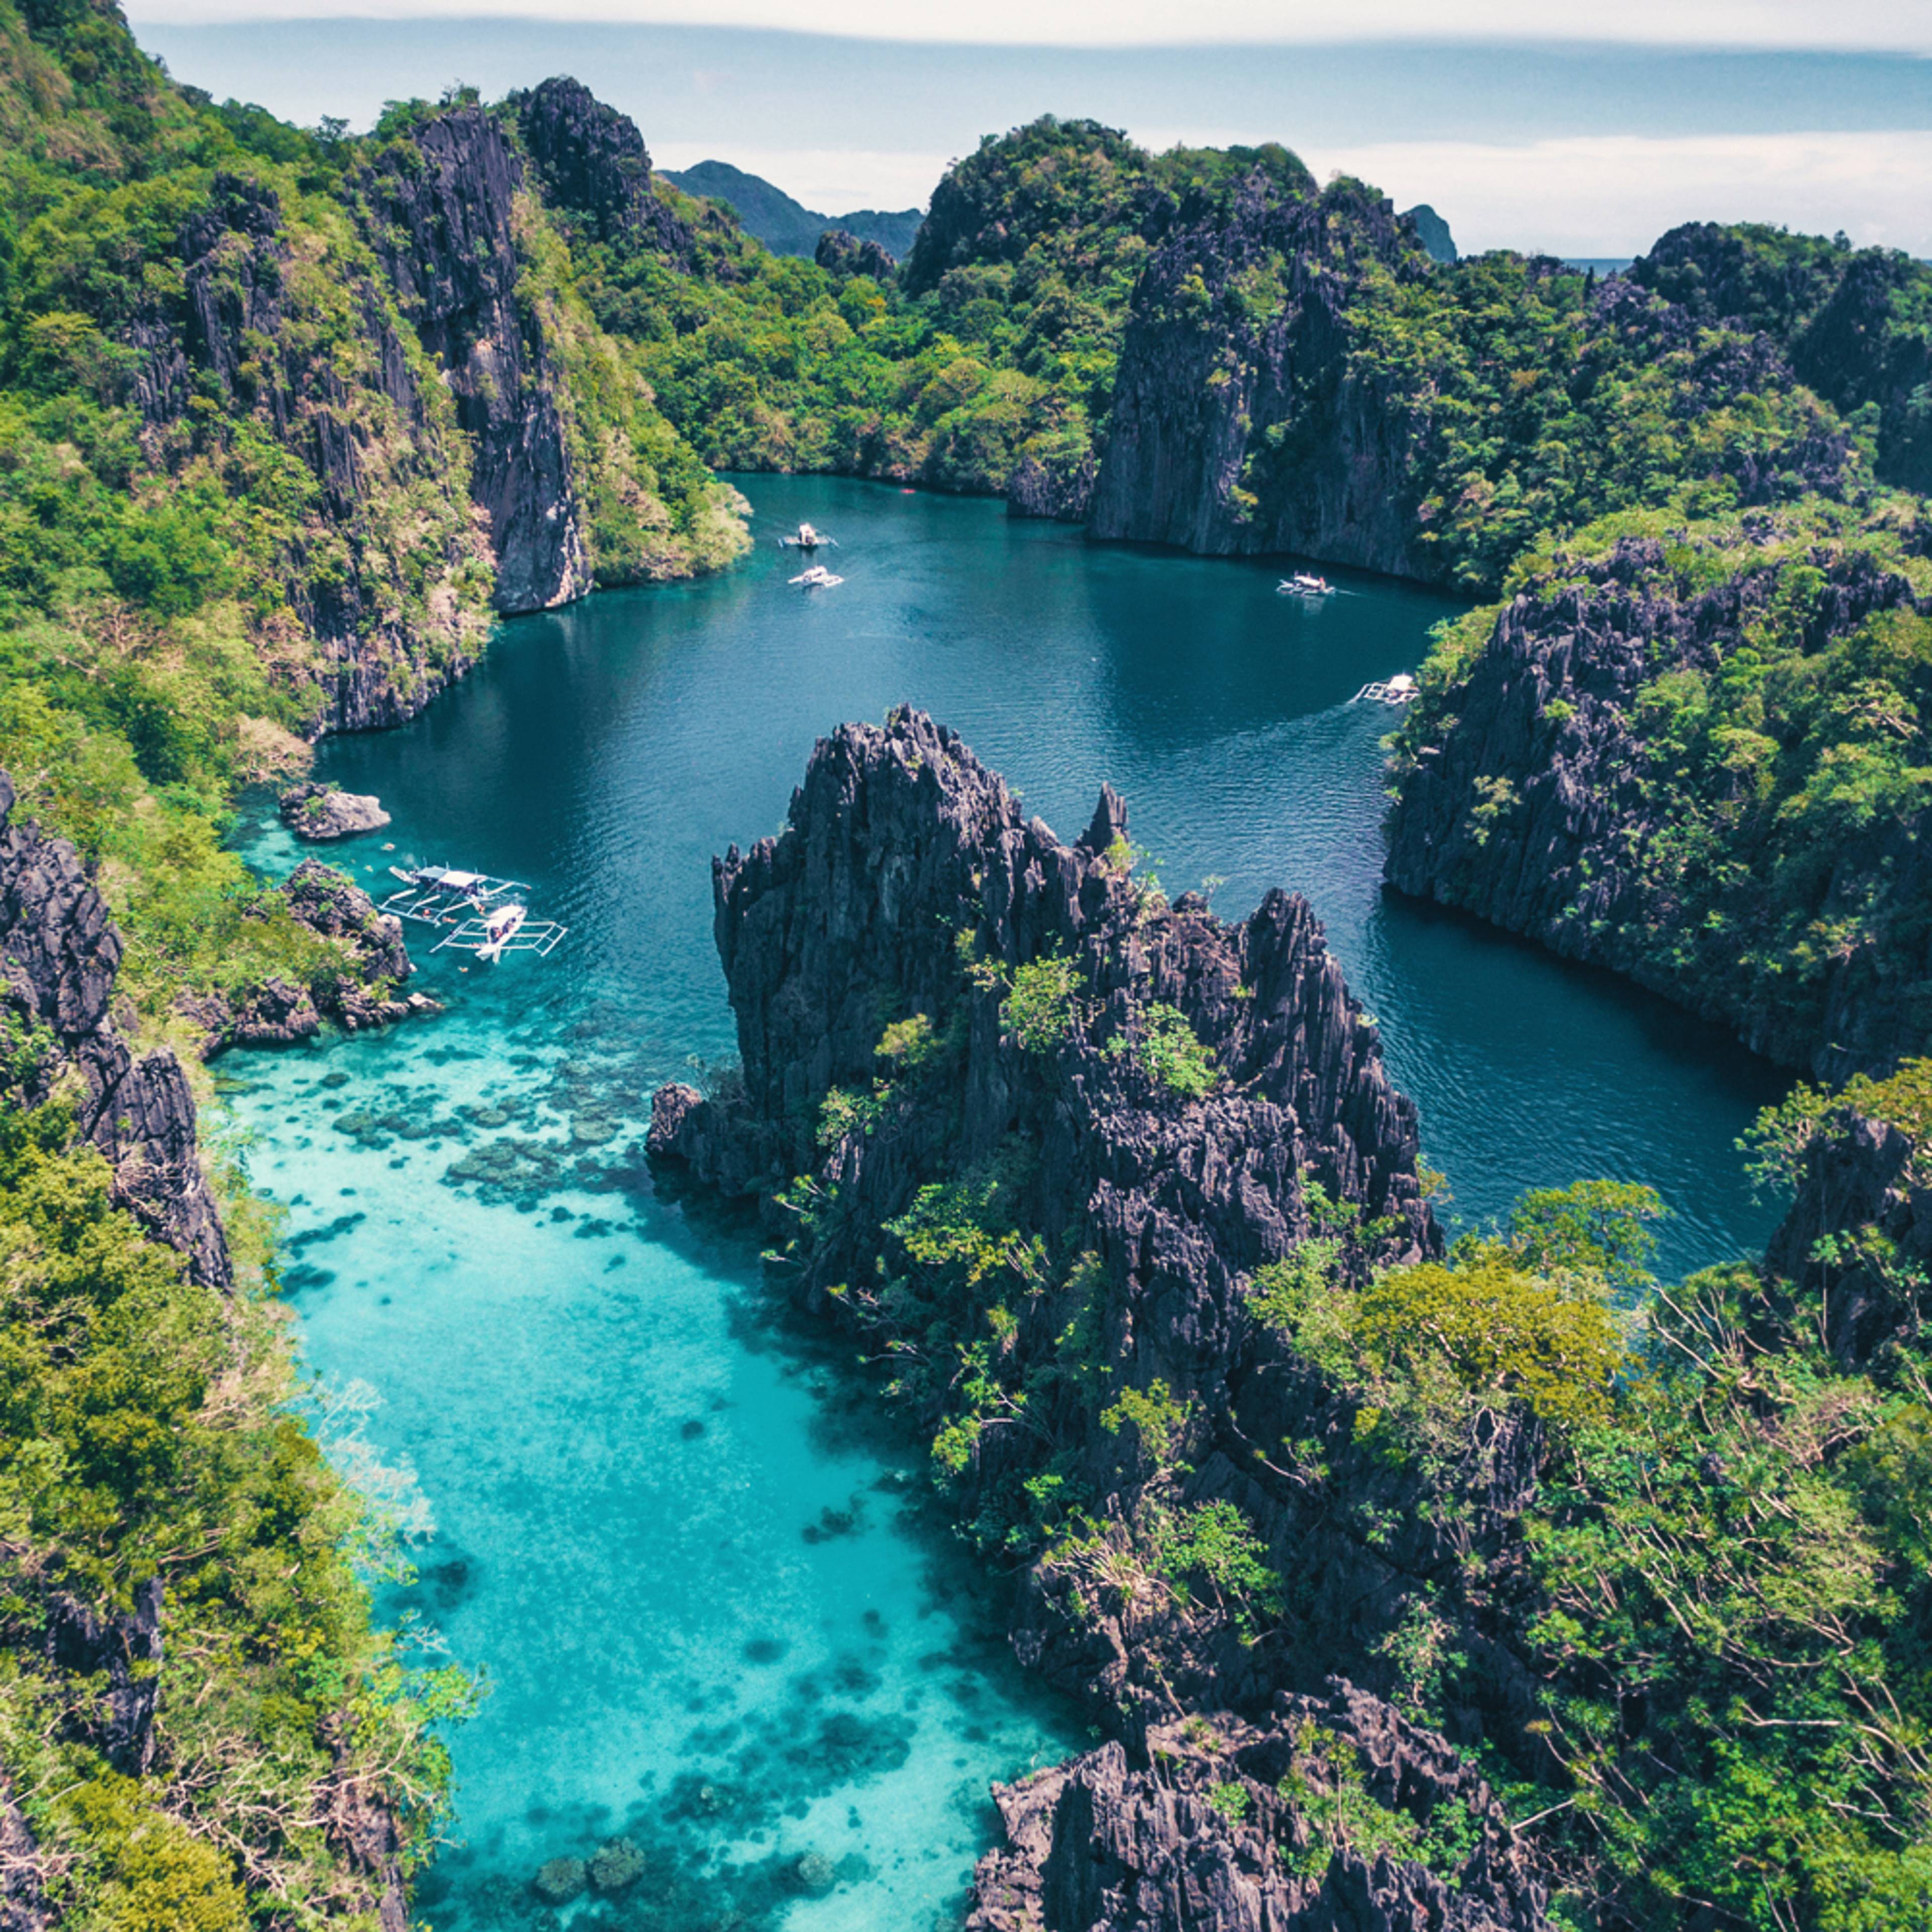 Design your perfect island holiday in The Philippines with a local expert